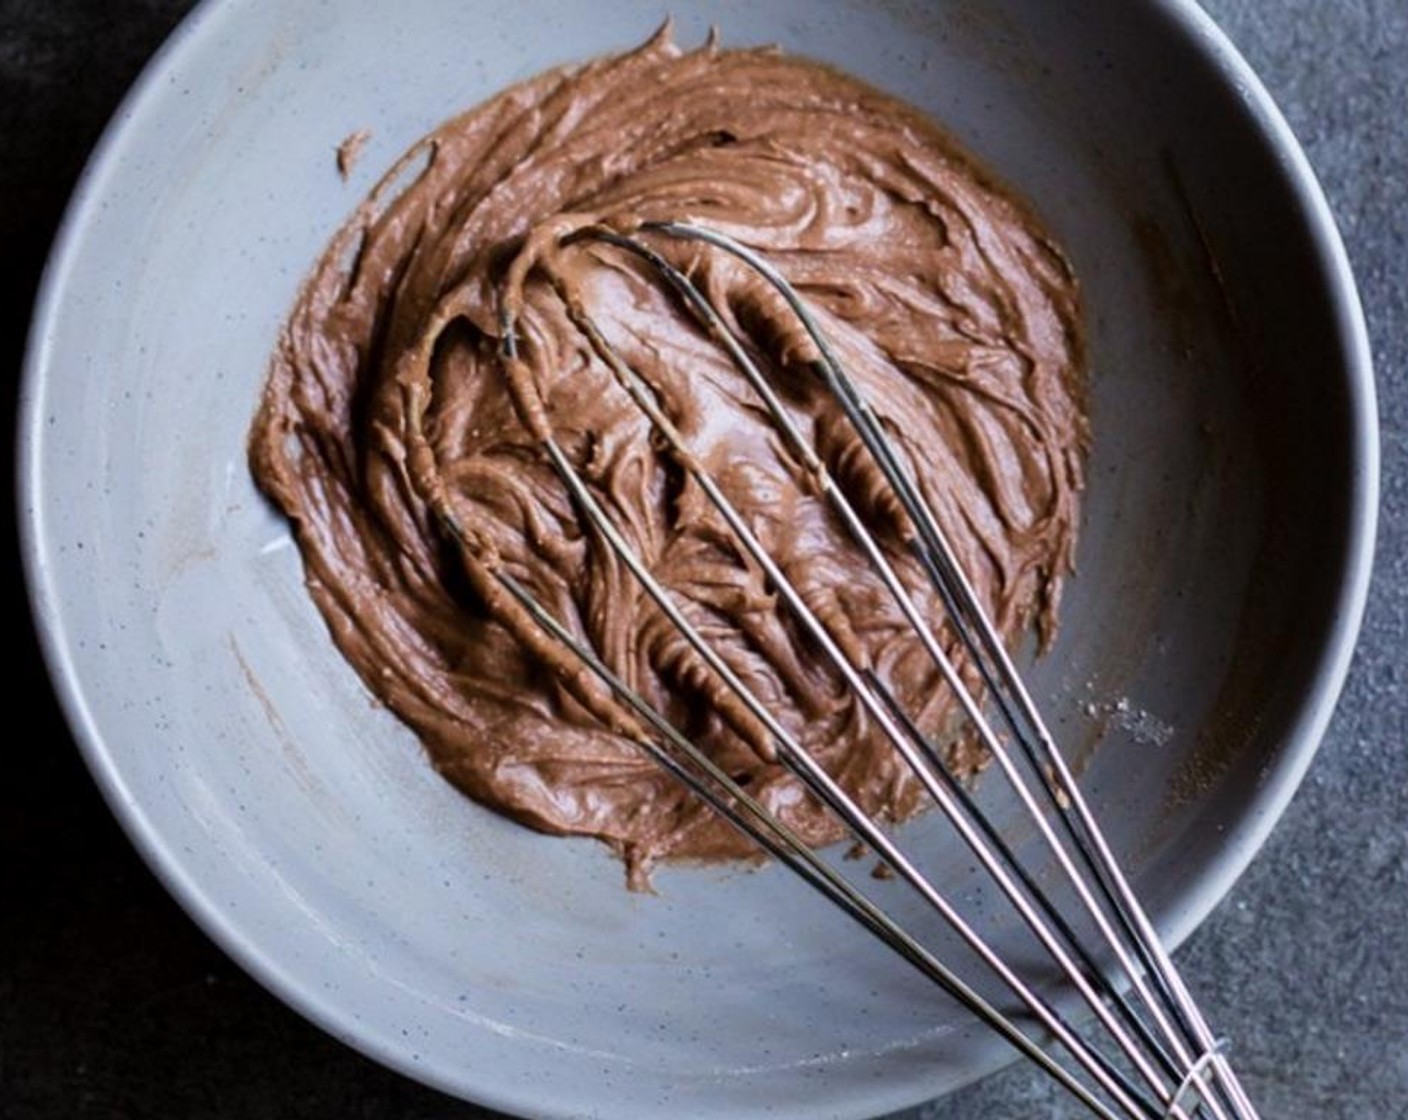 step 20 Whisk together the Active Dry Yeast (1/2 Tbsp), Water (1/4 cup), Granulated Sugar (1 Tbsp), Vegetable Oil (1/2 Tbsp), Salt (1/2 tsp), Rice Flour (1/3 cup) and Unsweetened Cocoa Powder (1 Tbsp). Whisk until smooth.